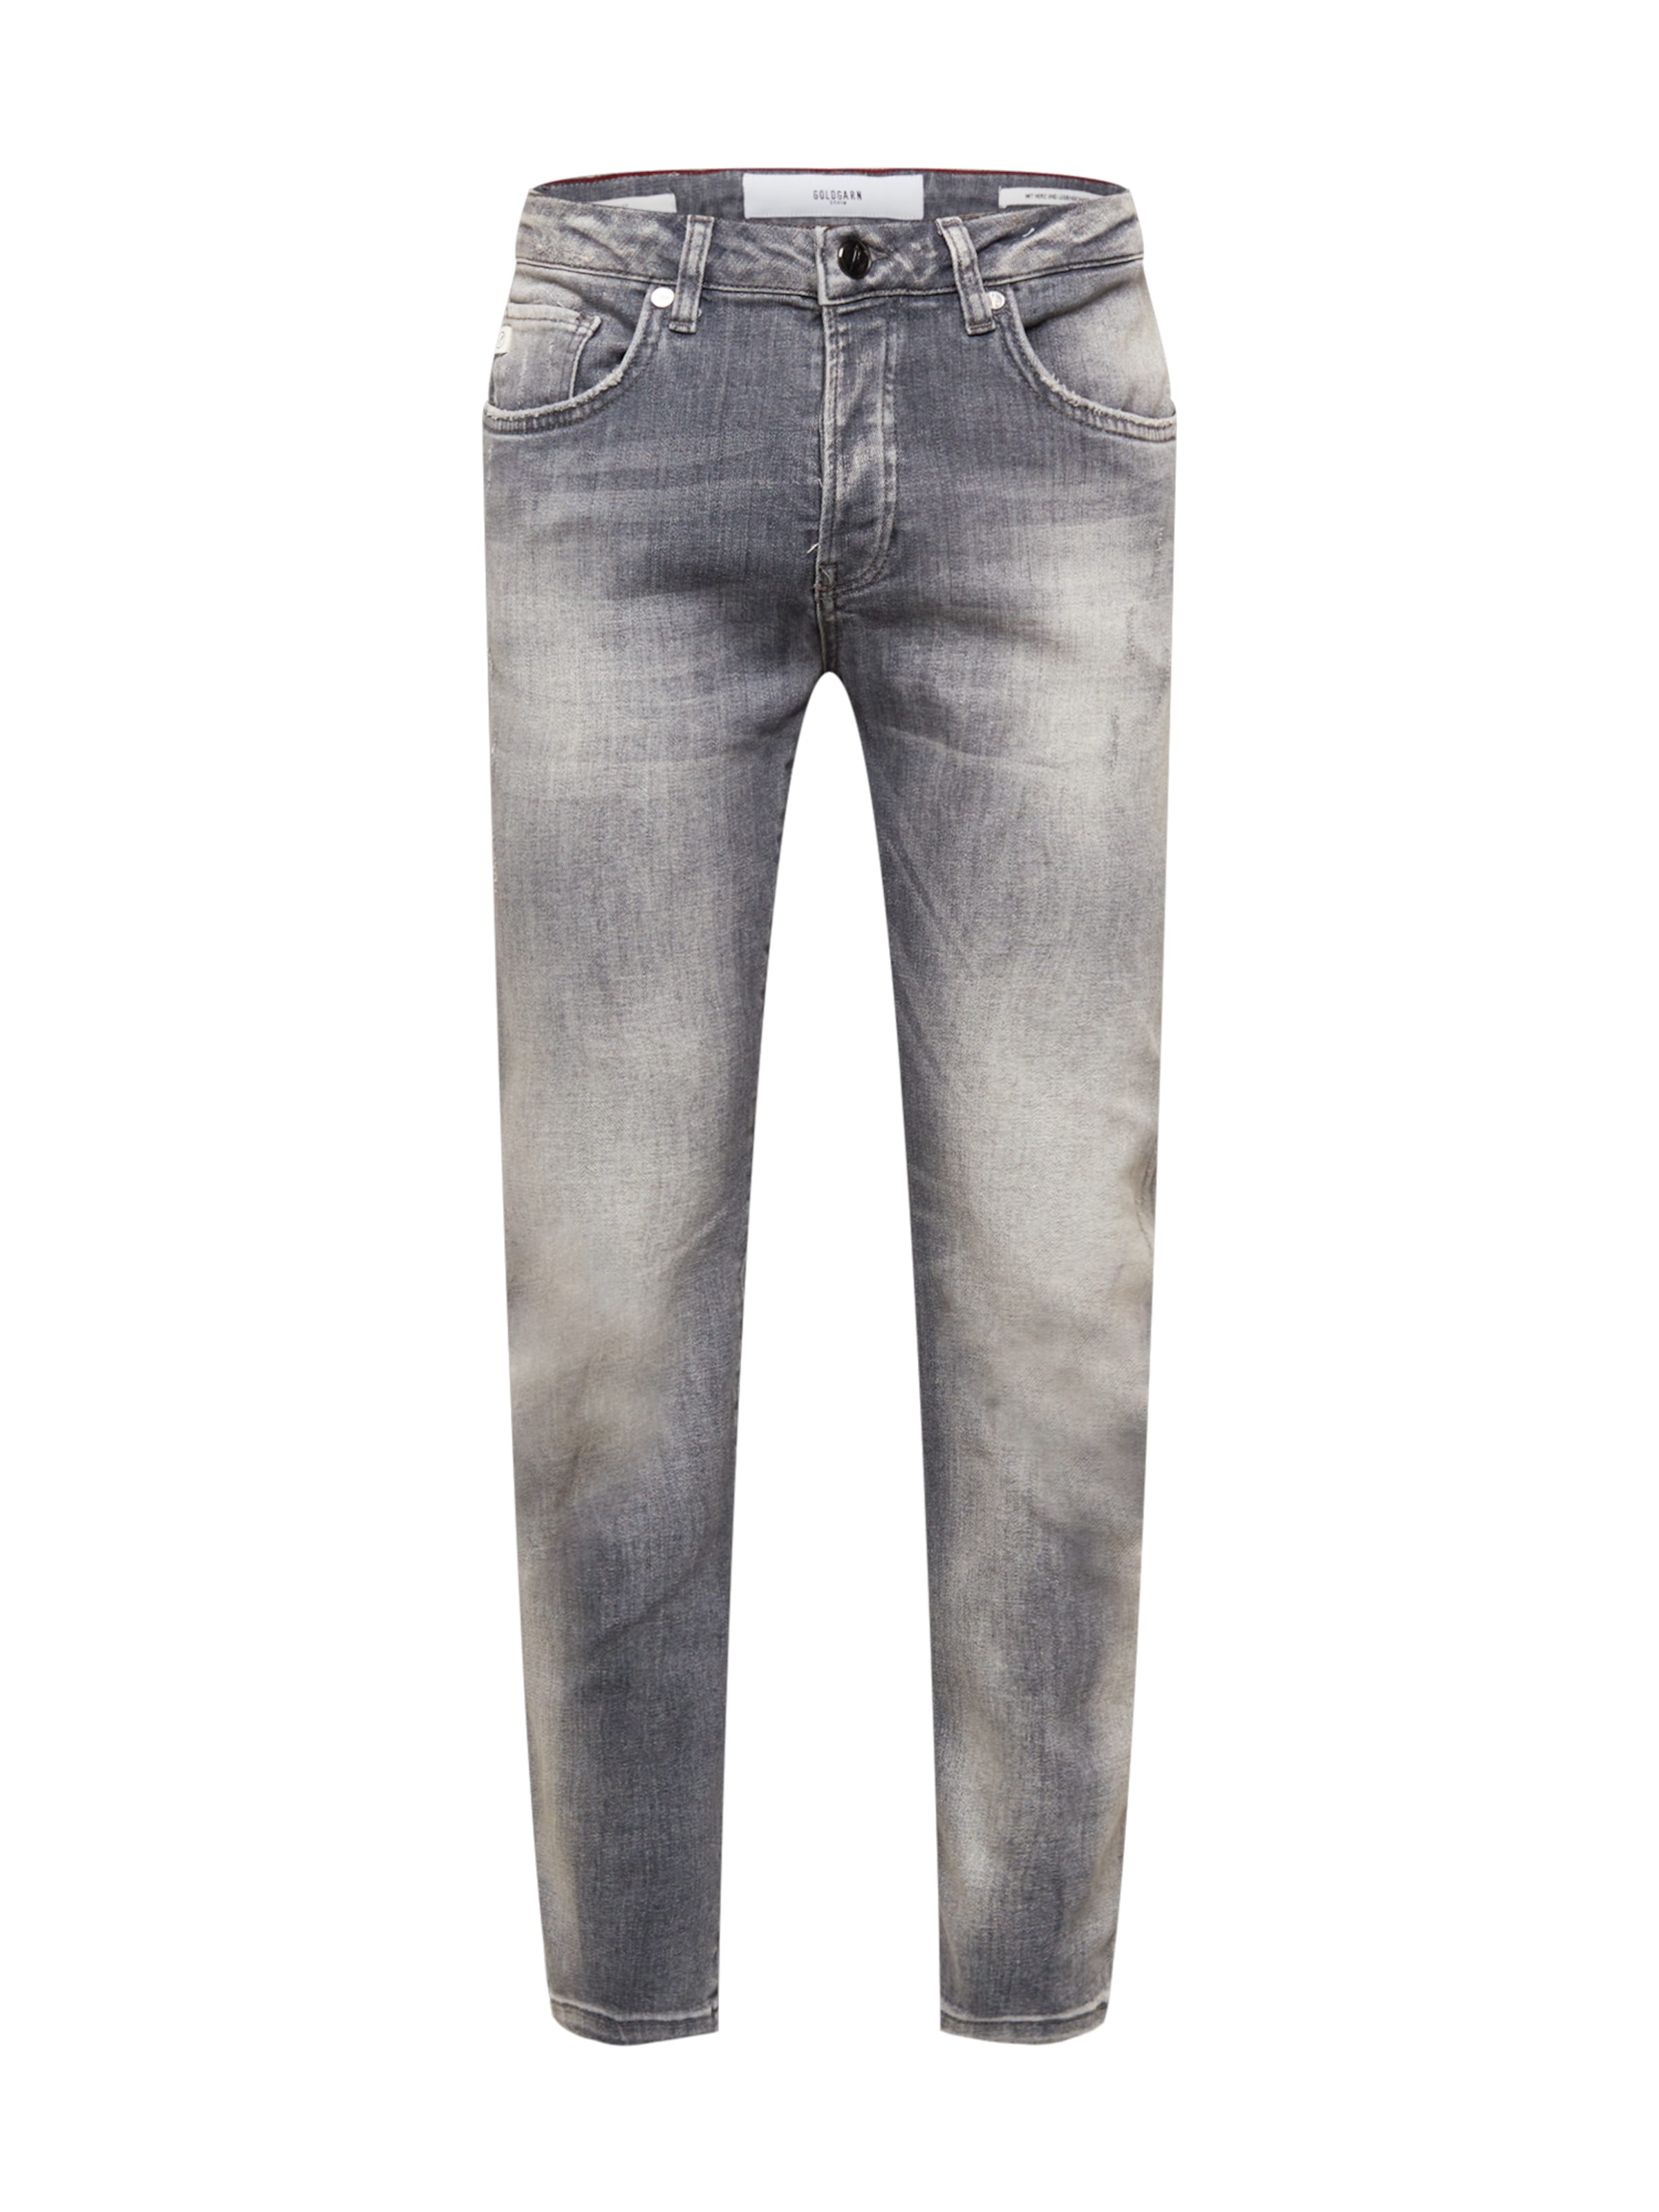 Jeans If9l6 Goldgarn Jeans in Grigio 